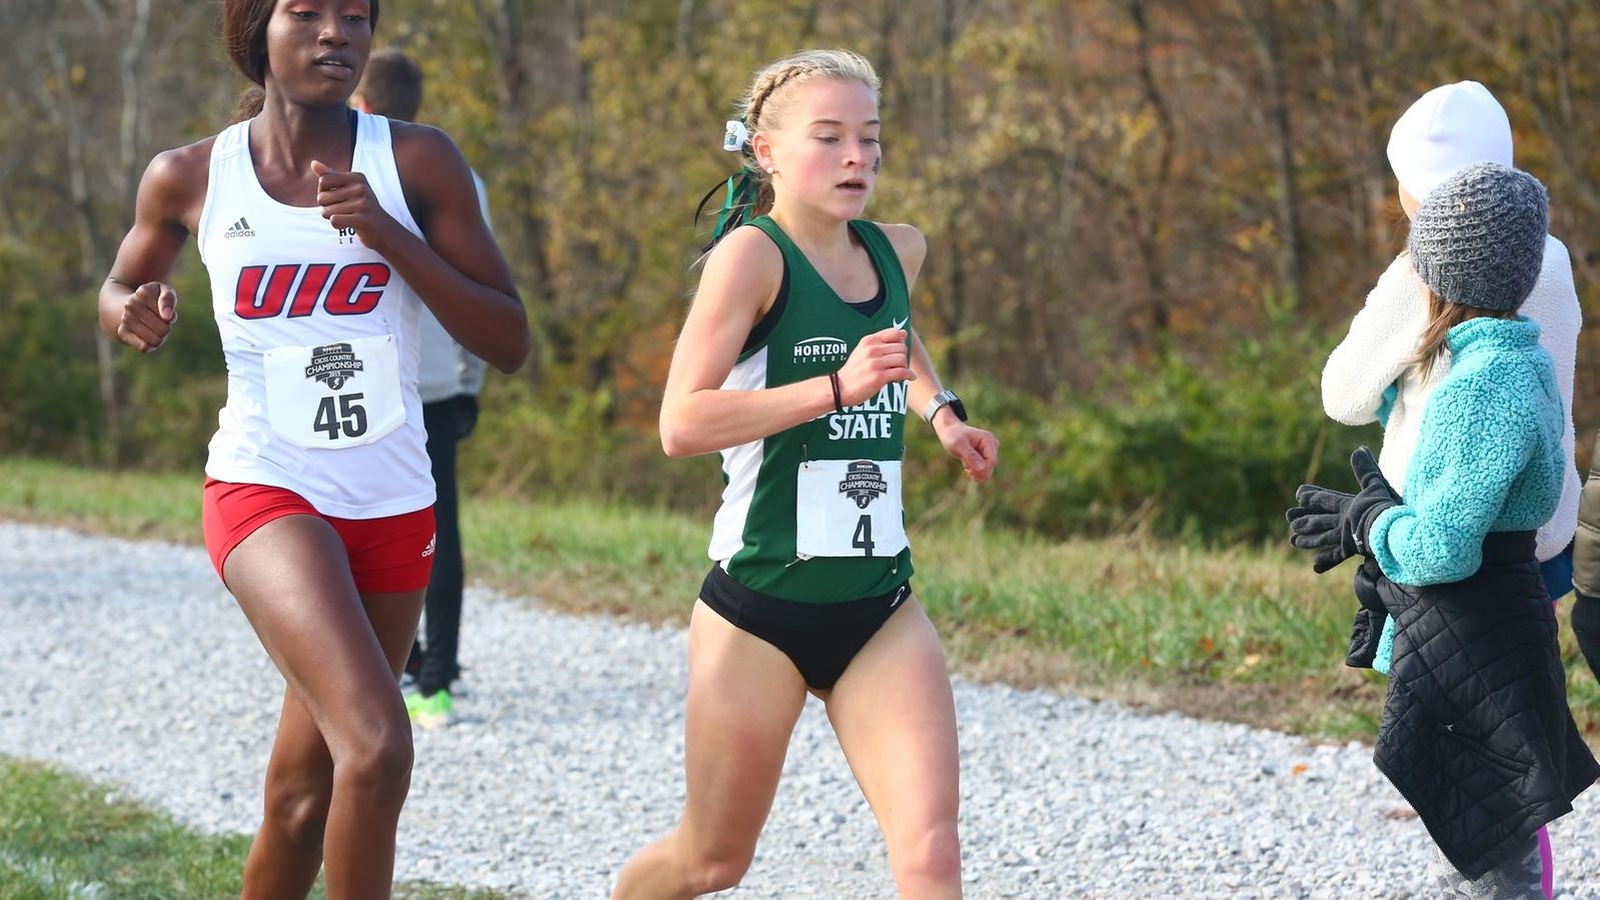 Korte & Smith Post Top-Five Finishes As Vikings Open 2021 At YSU Invitational